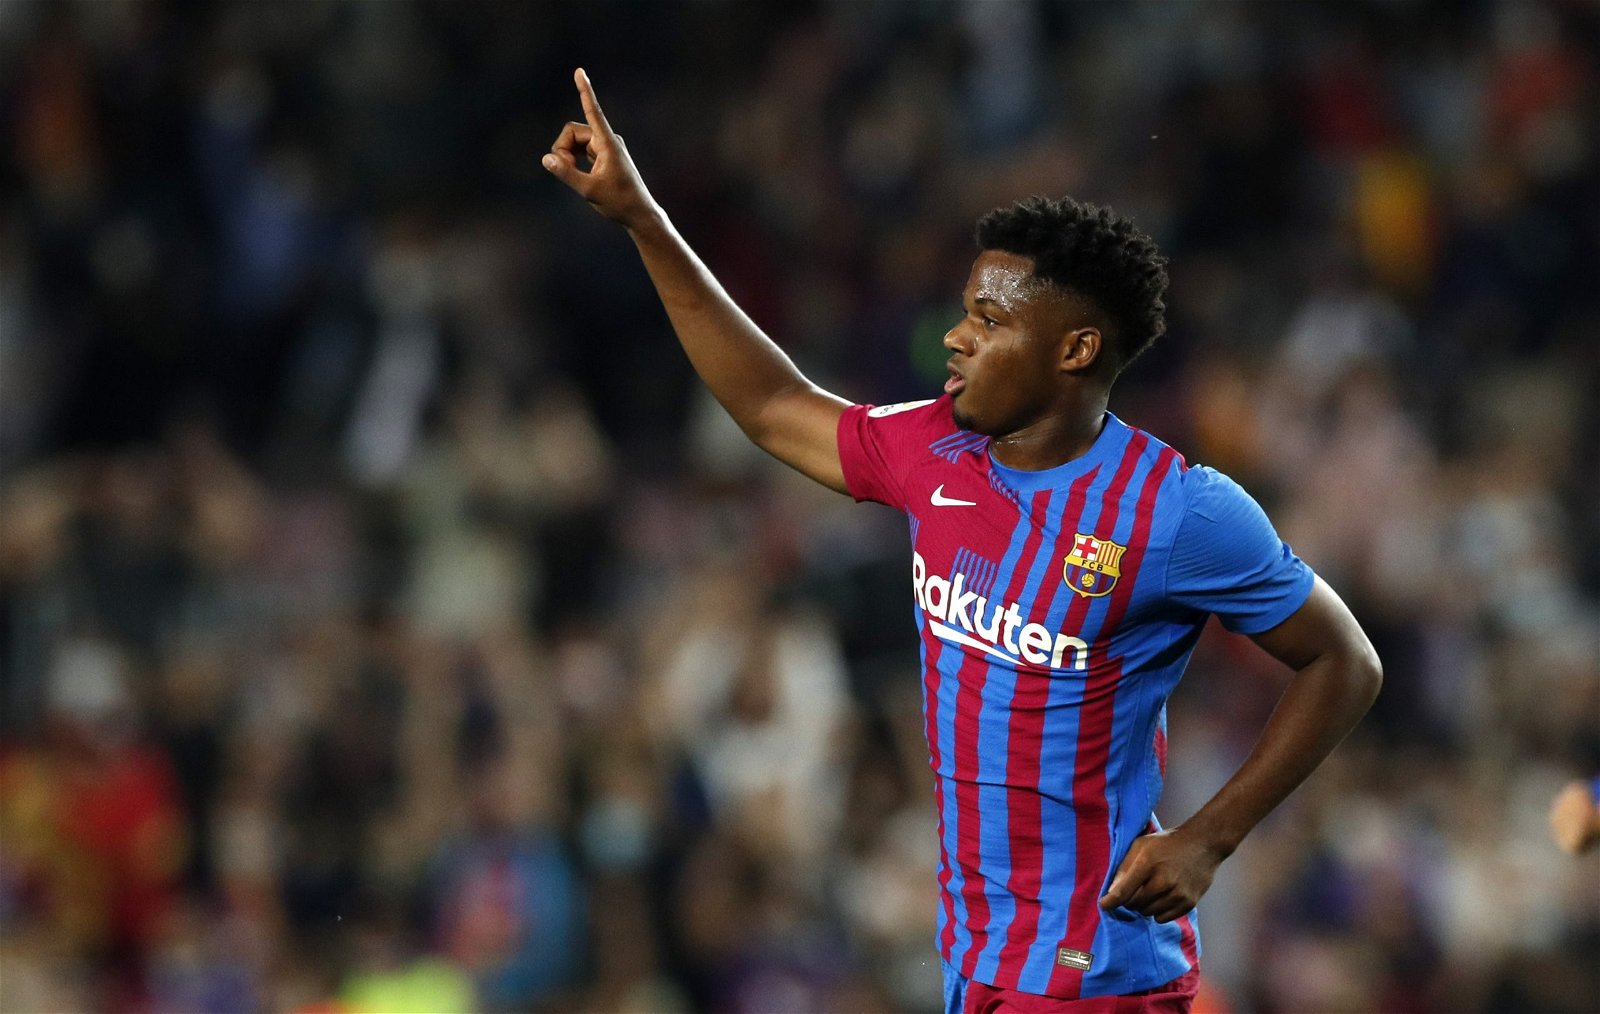 OFFICIAL: Ansu Fati signs a long-term contract with Barcelona